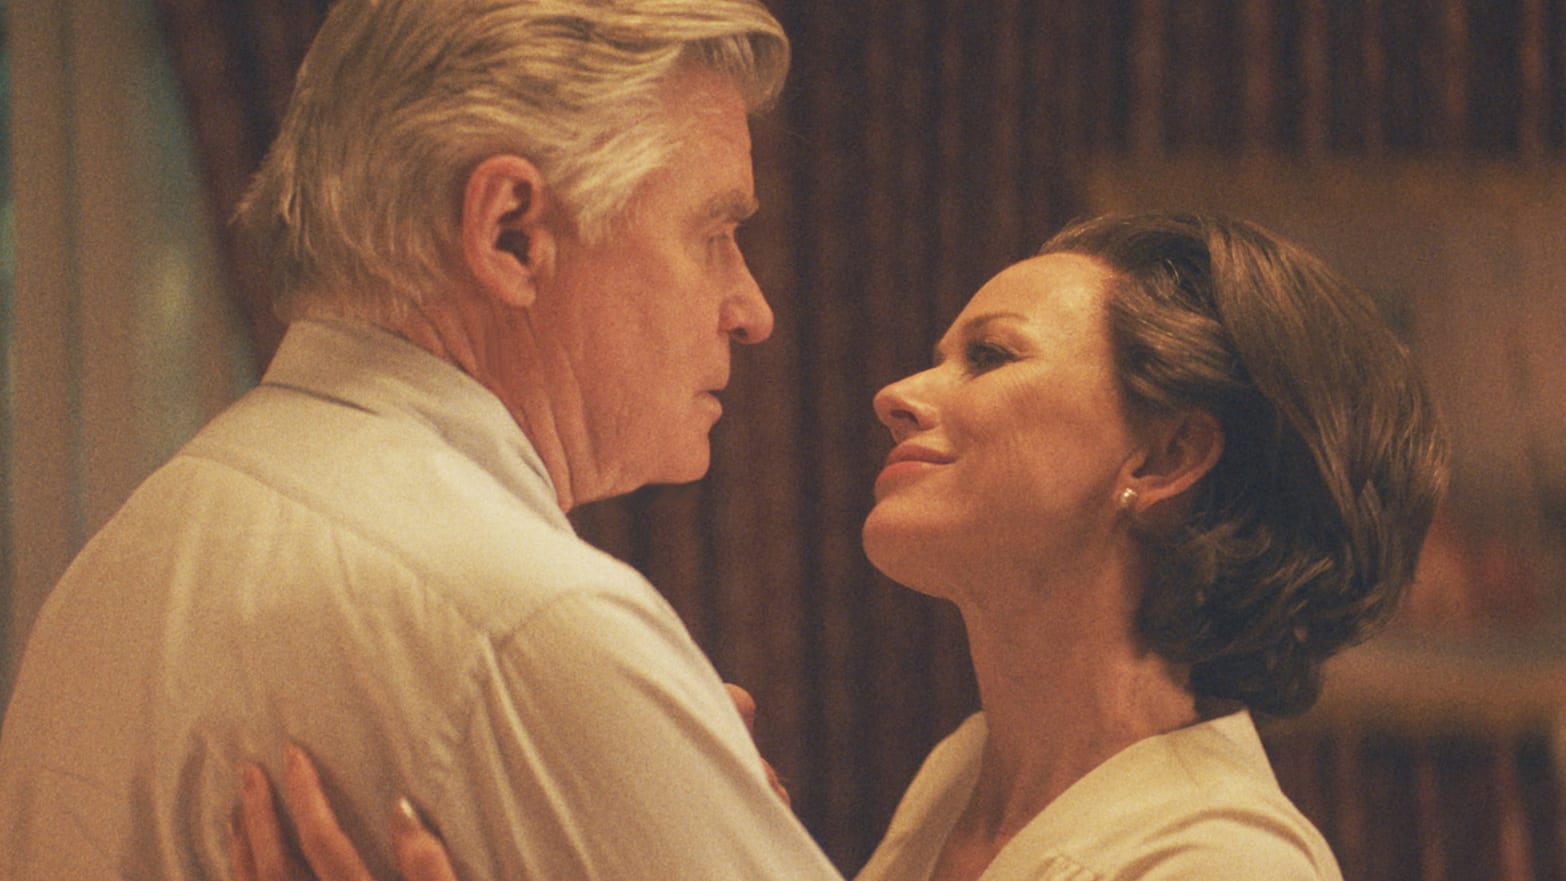 Treat Williams and Naomi Watts in the Feud.